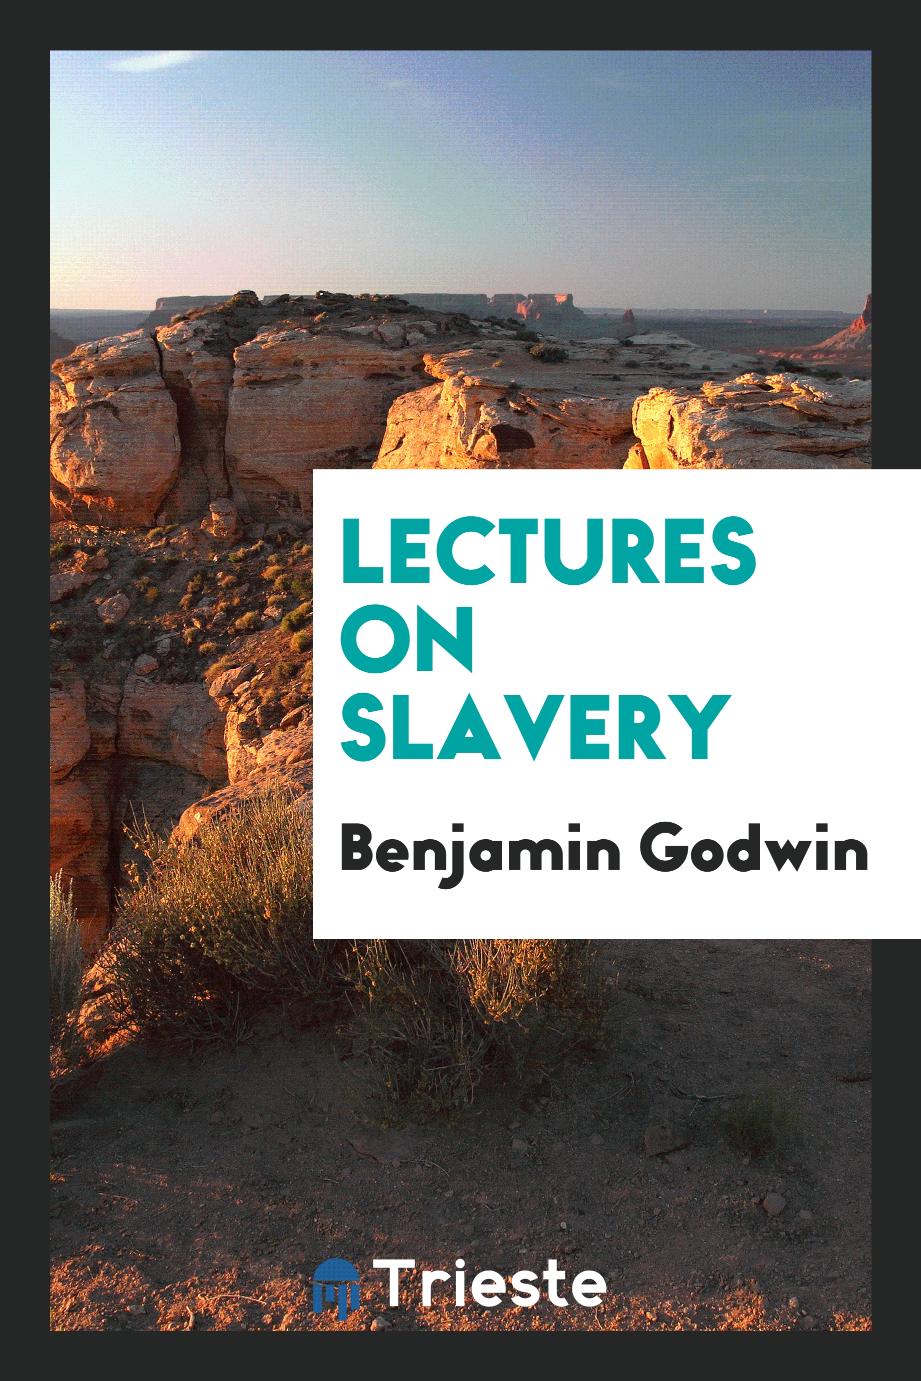 Lectures on slavery